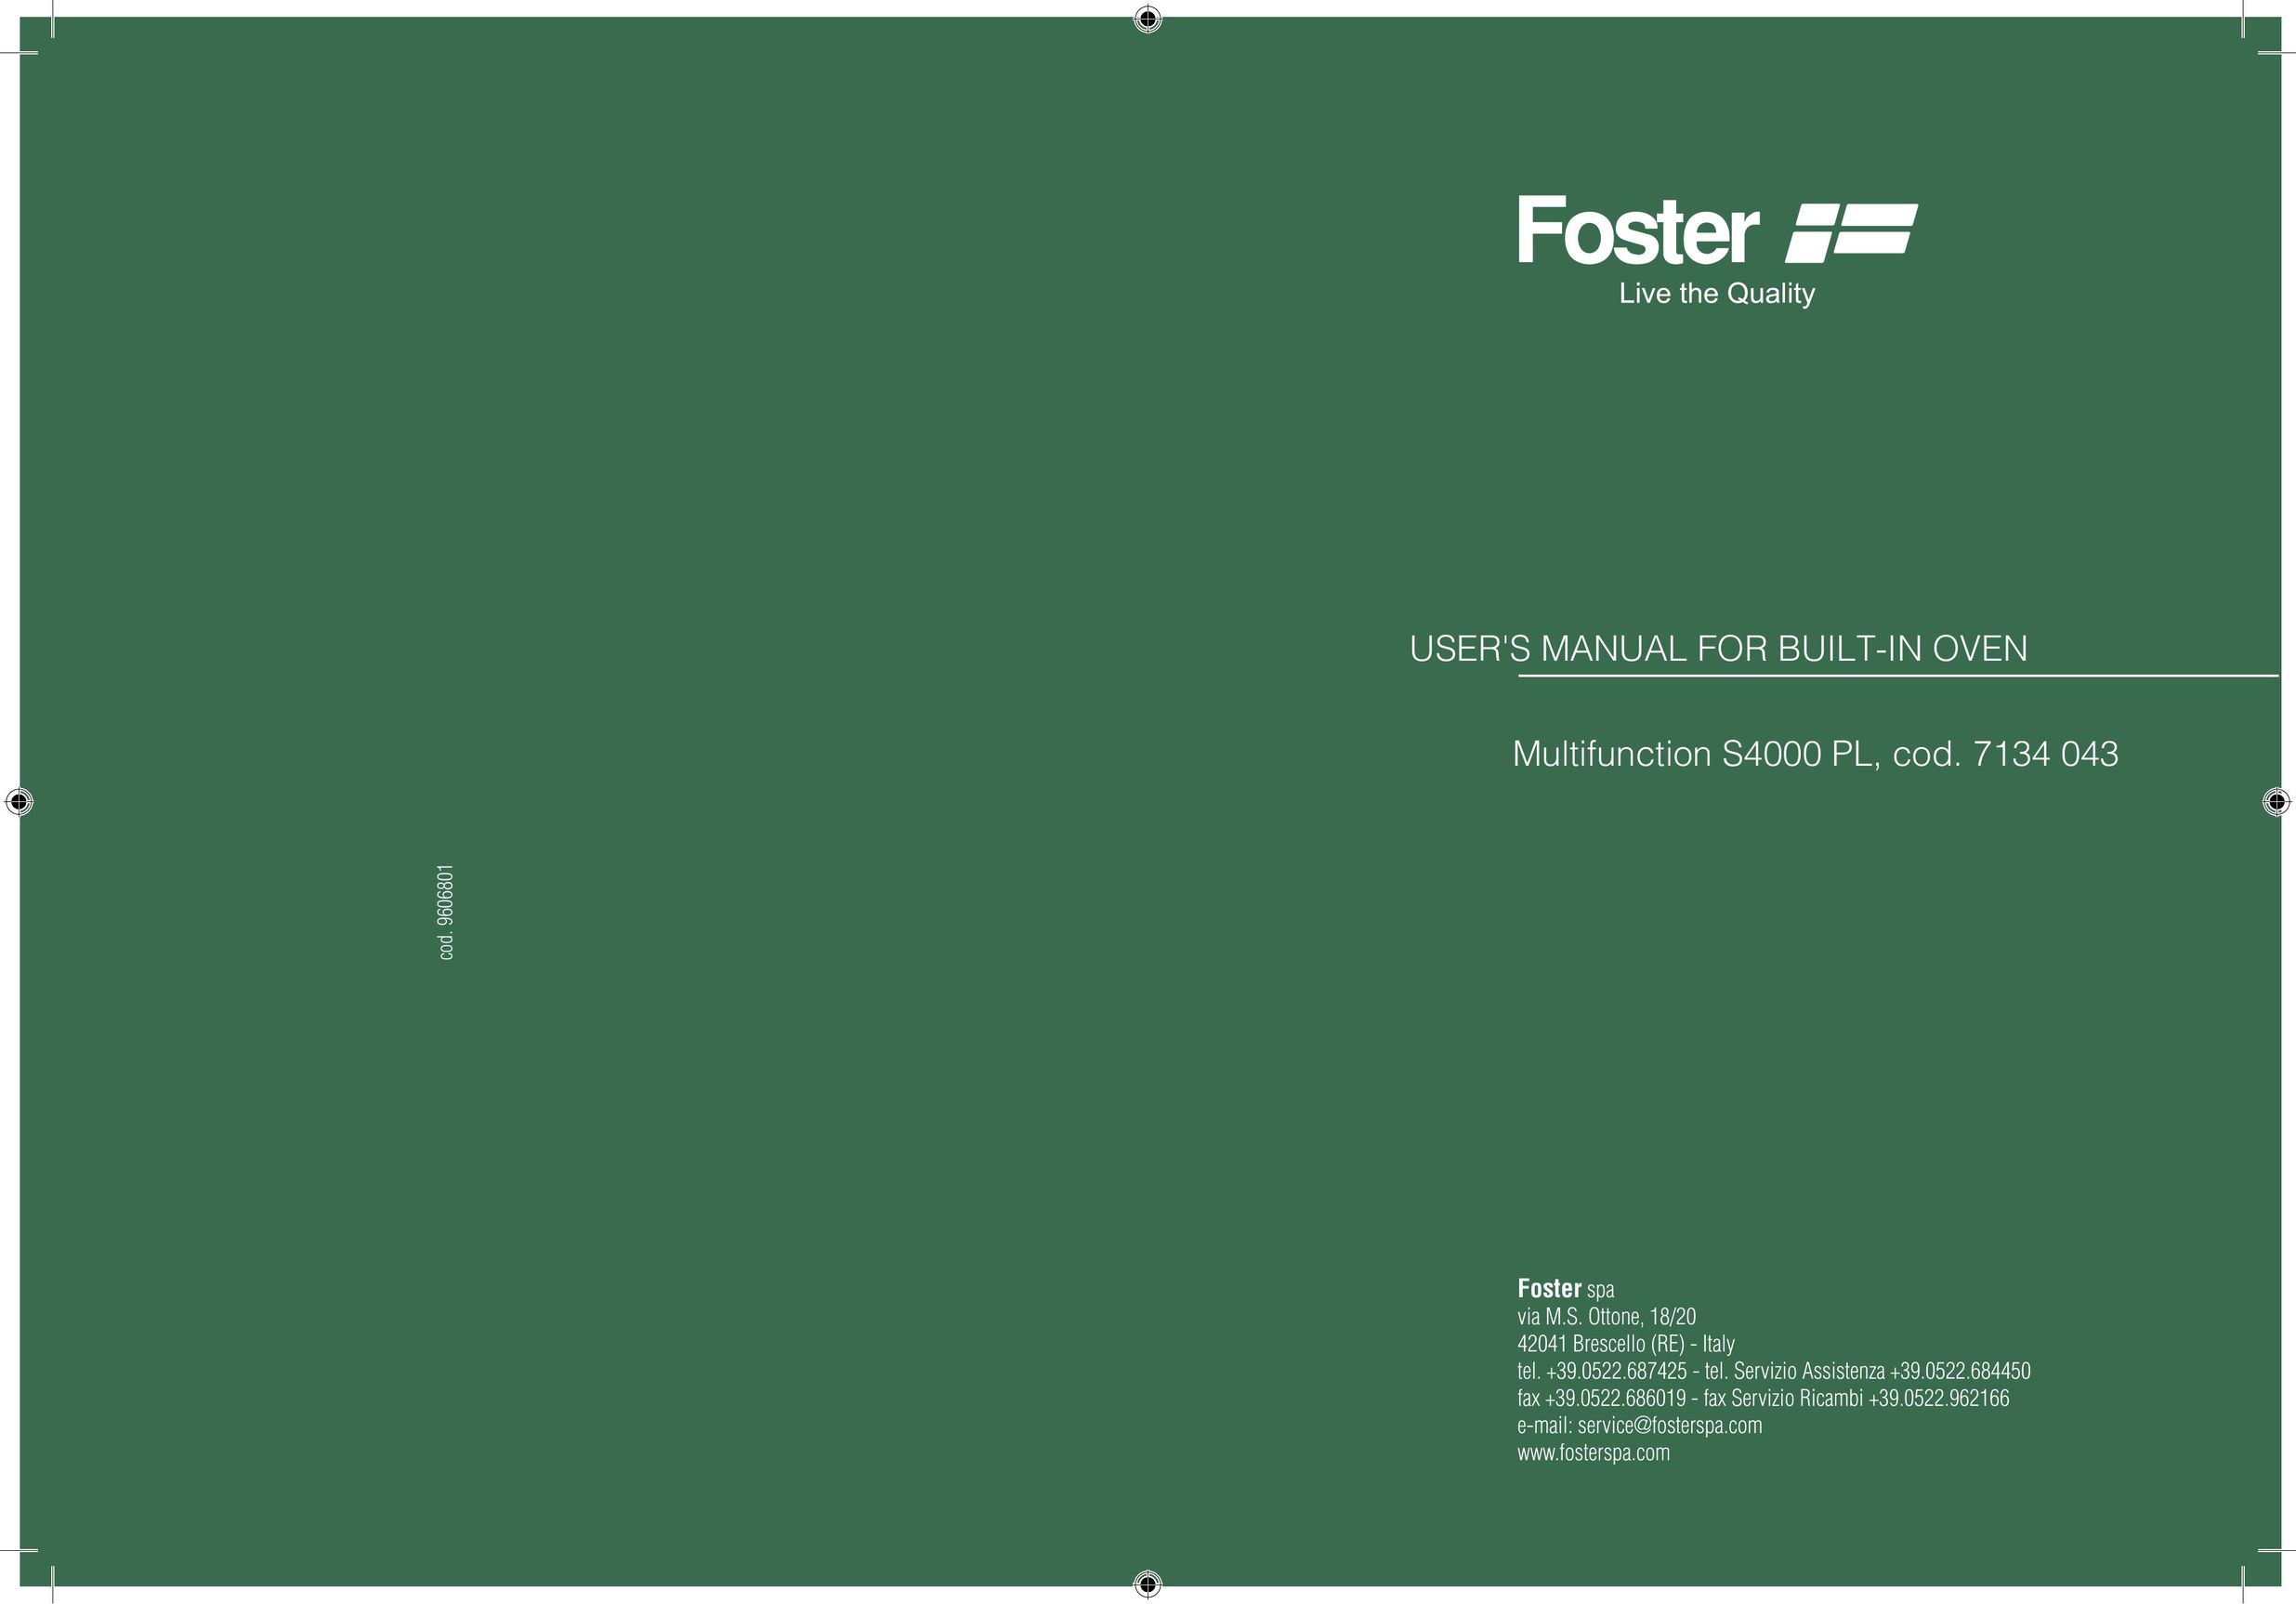 Foster S4000 PL Oven User Manual